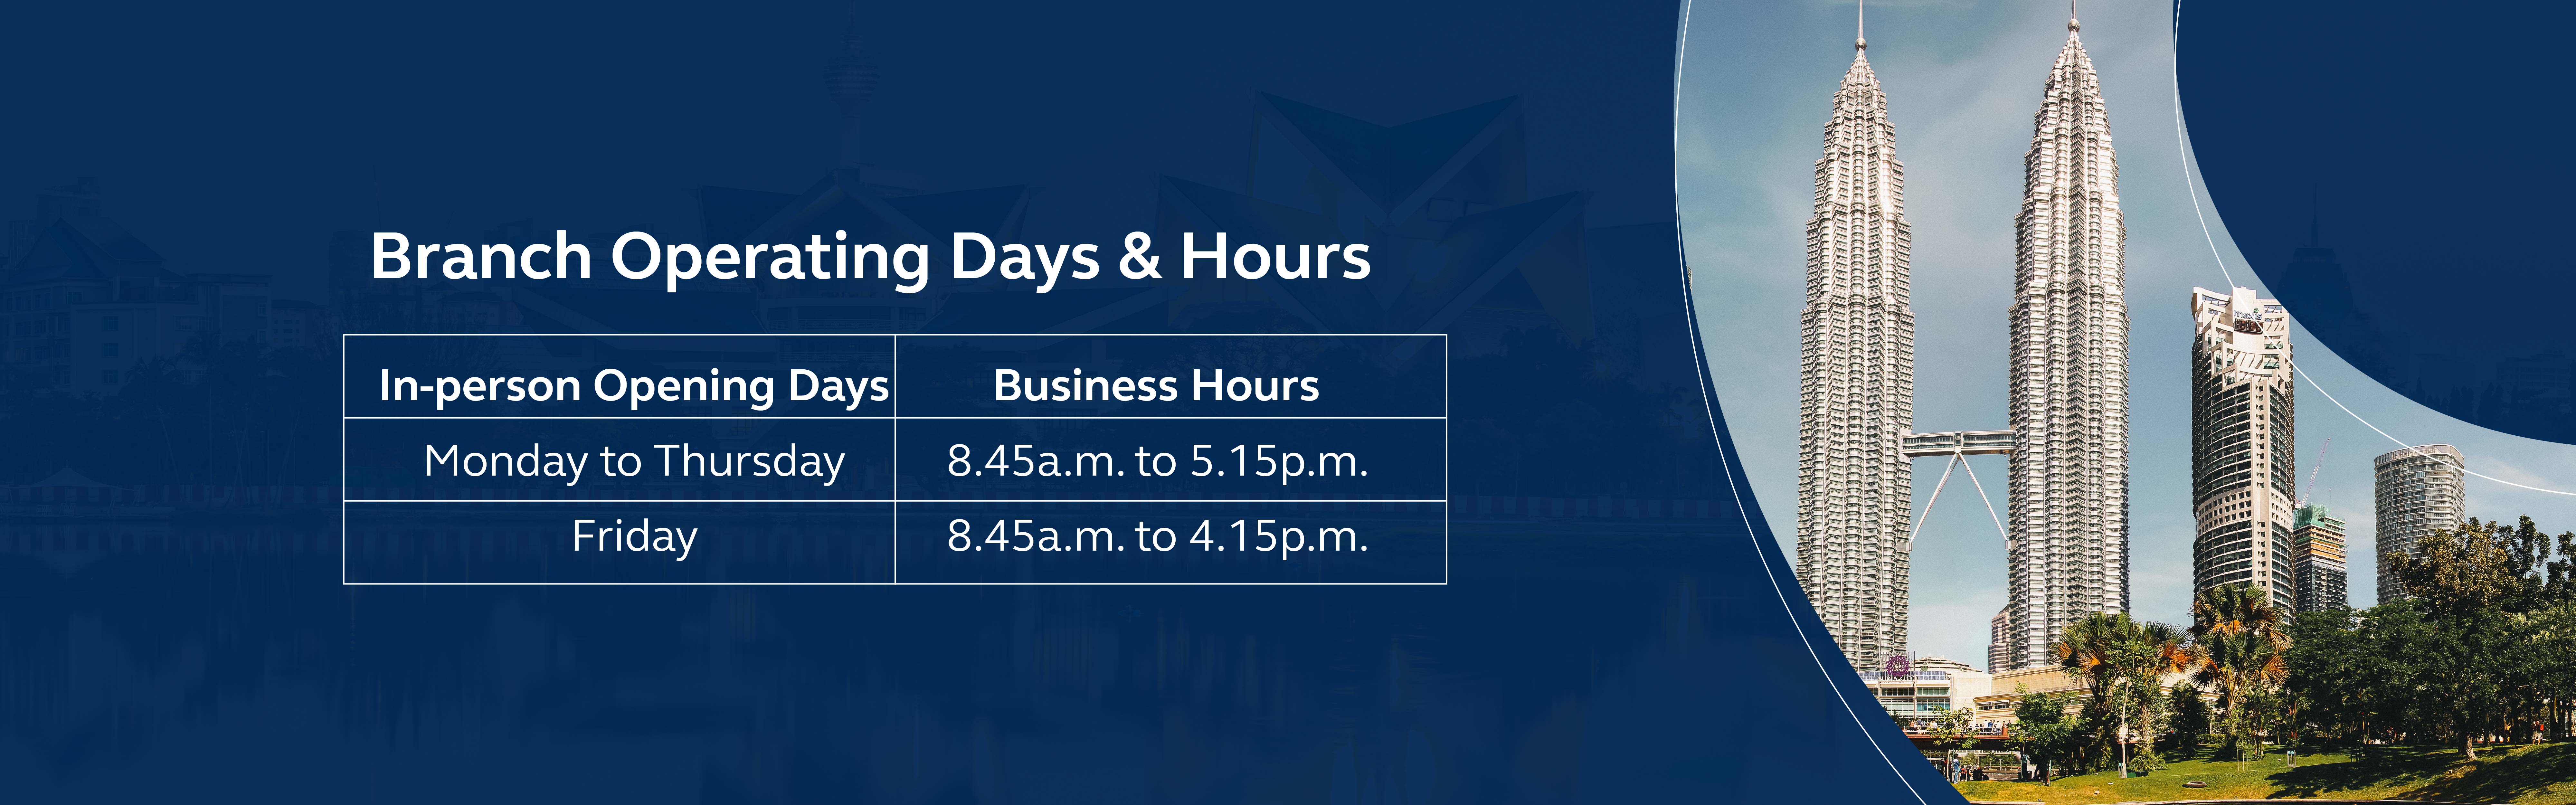 Branch Operating Days & Hours_Top Banner_ENG